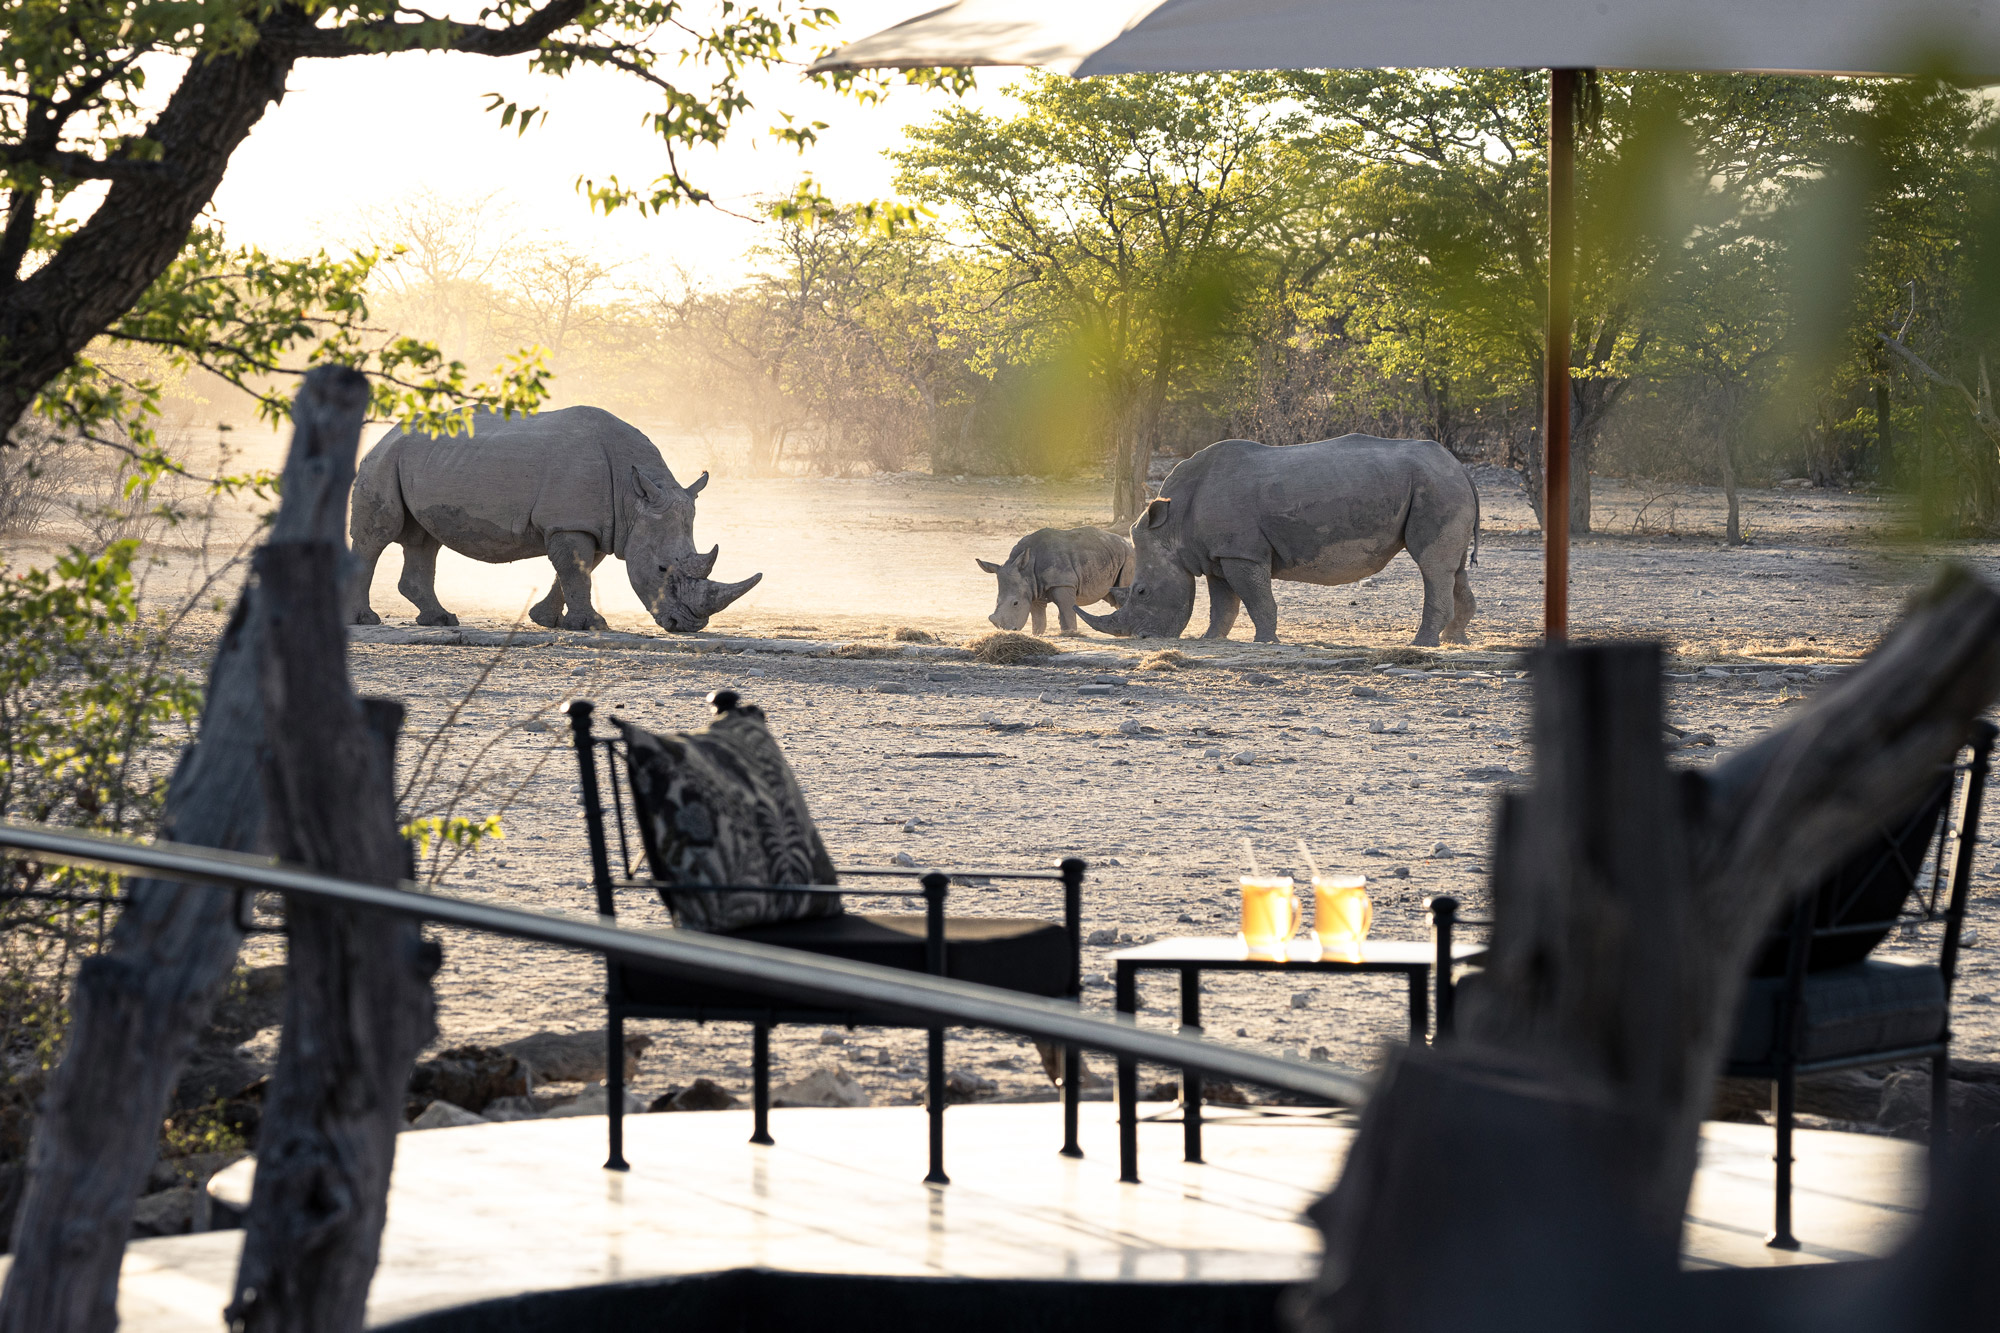 Table and chairs in desert clearing, rhinoceroses in background